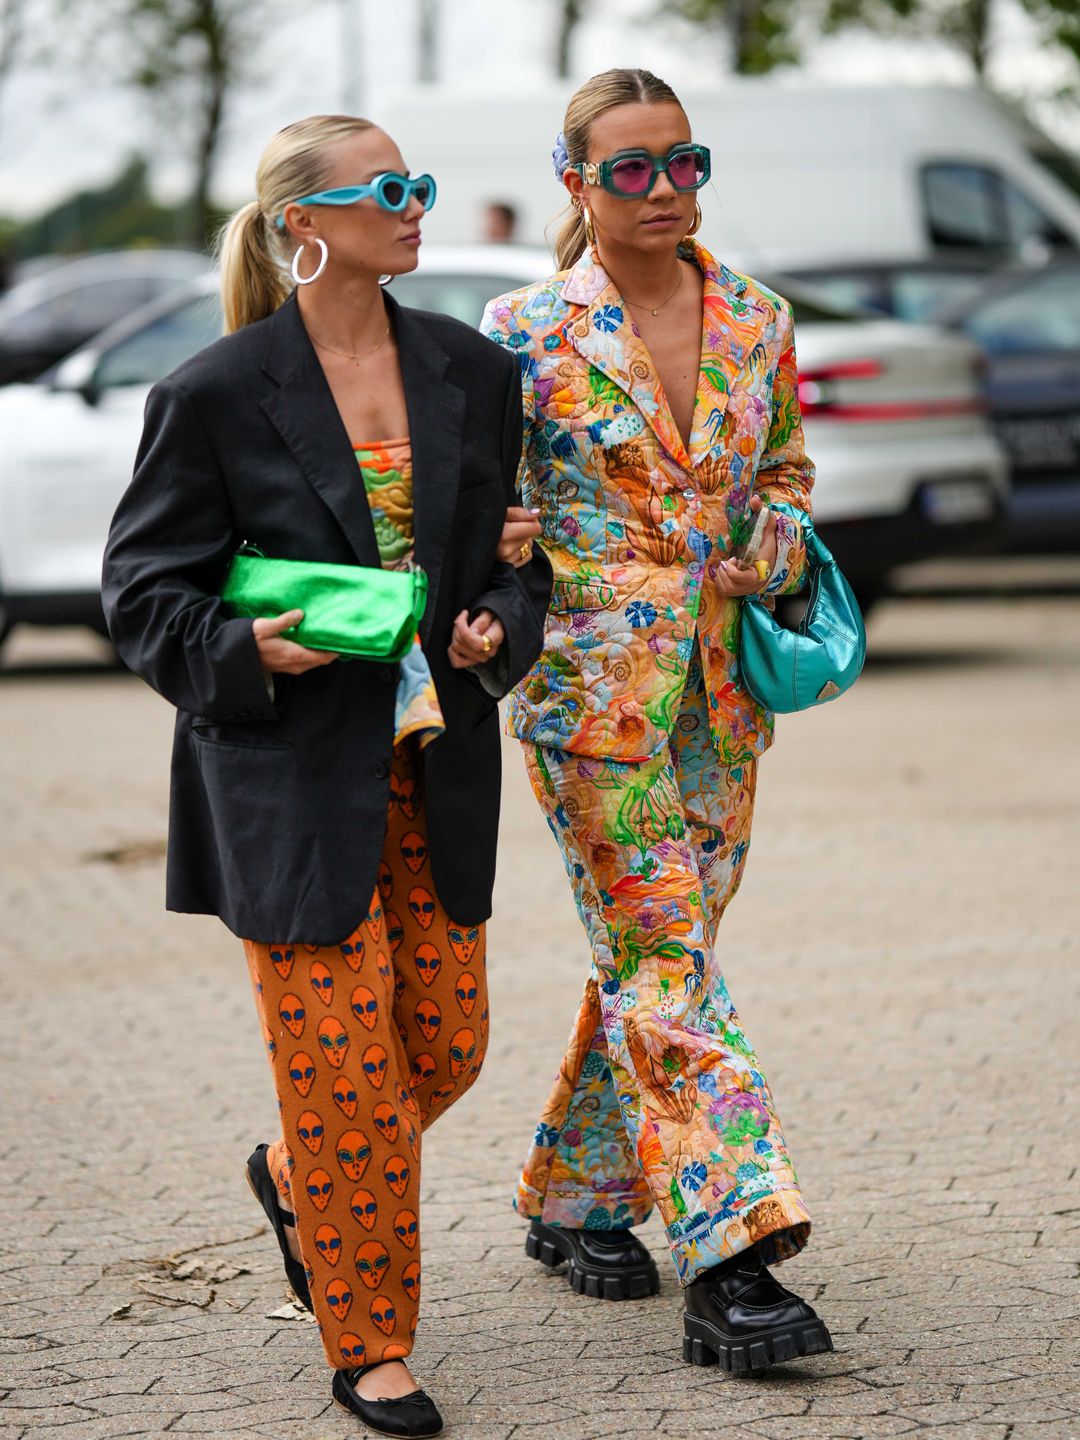 Fashion week guests wearing bright outfits